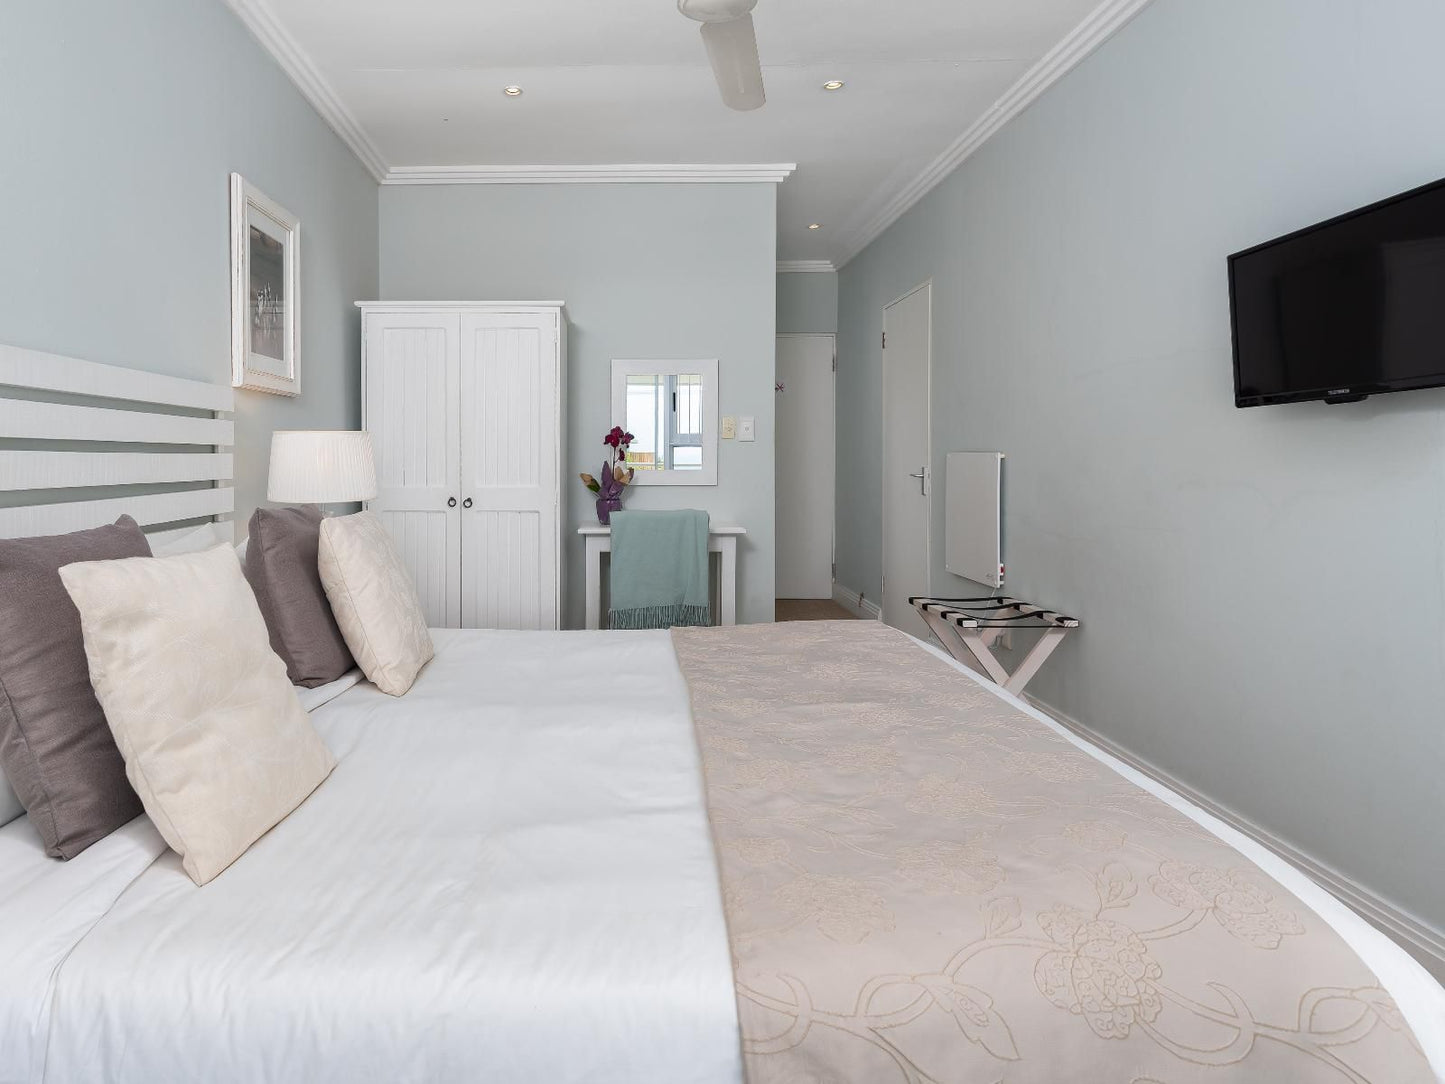 61 On Camps Bay Drive Camps Bay Cape Town Western Cape South Africa Colorless, Bedroom